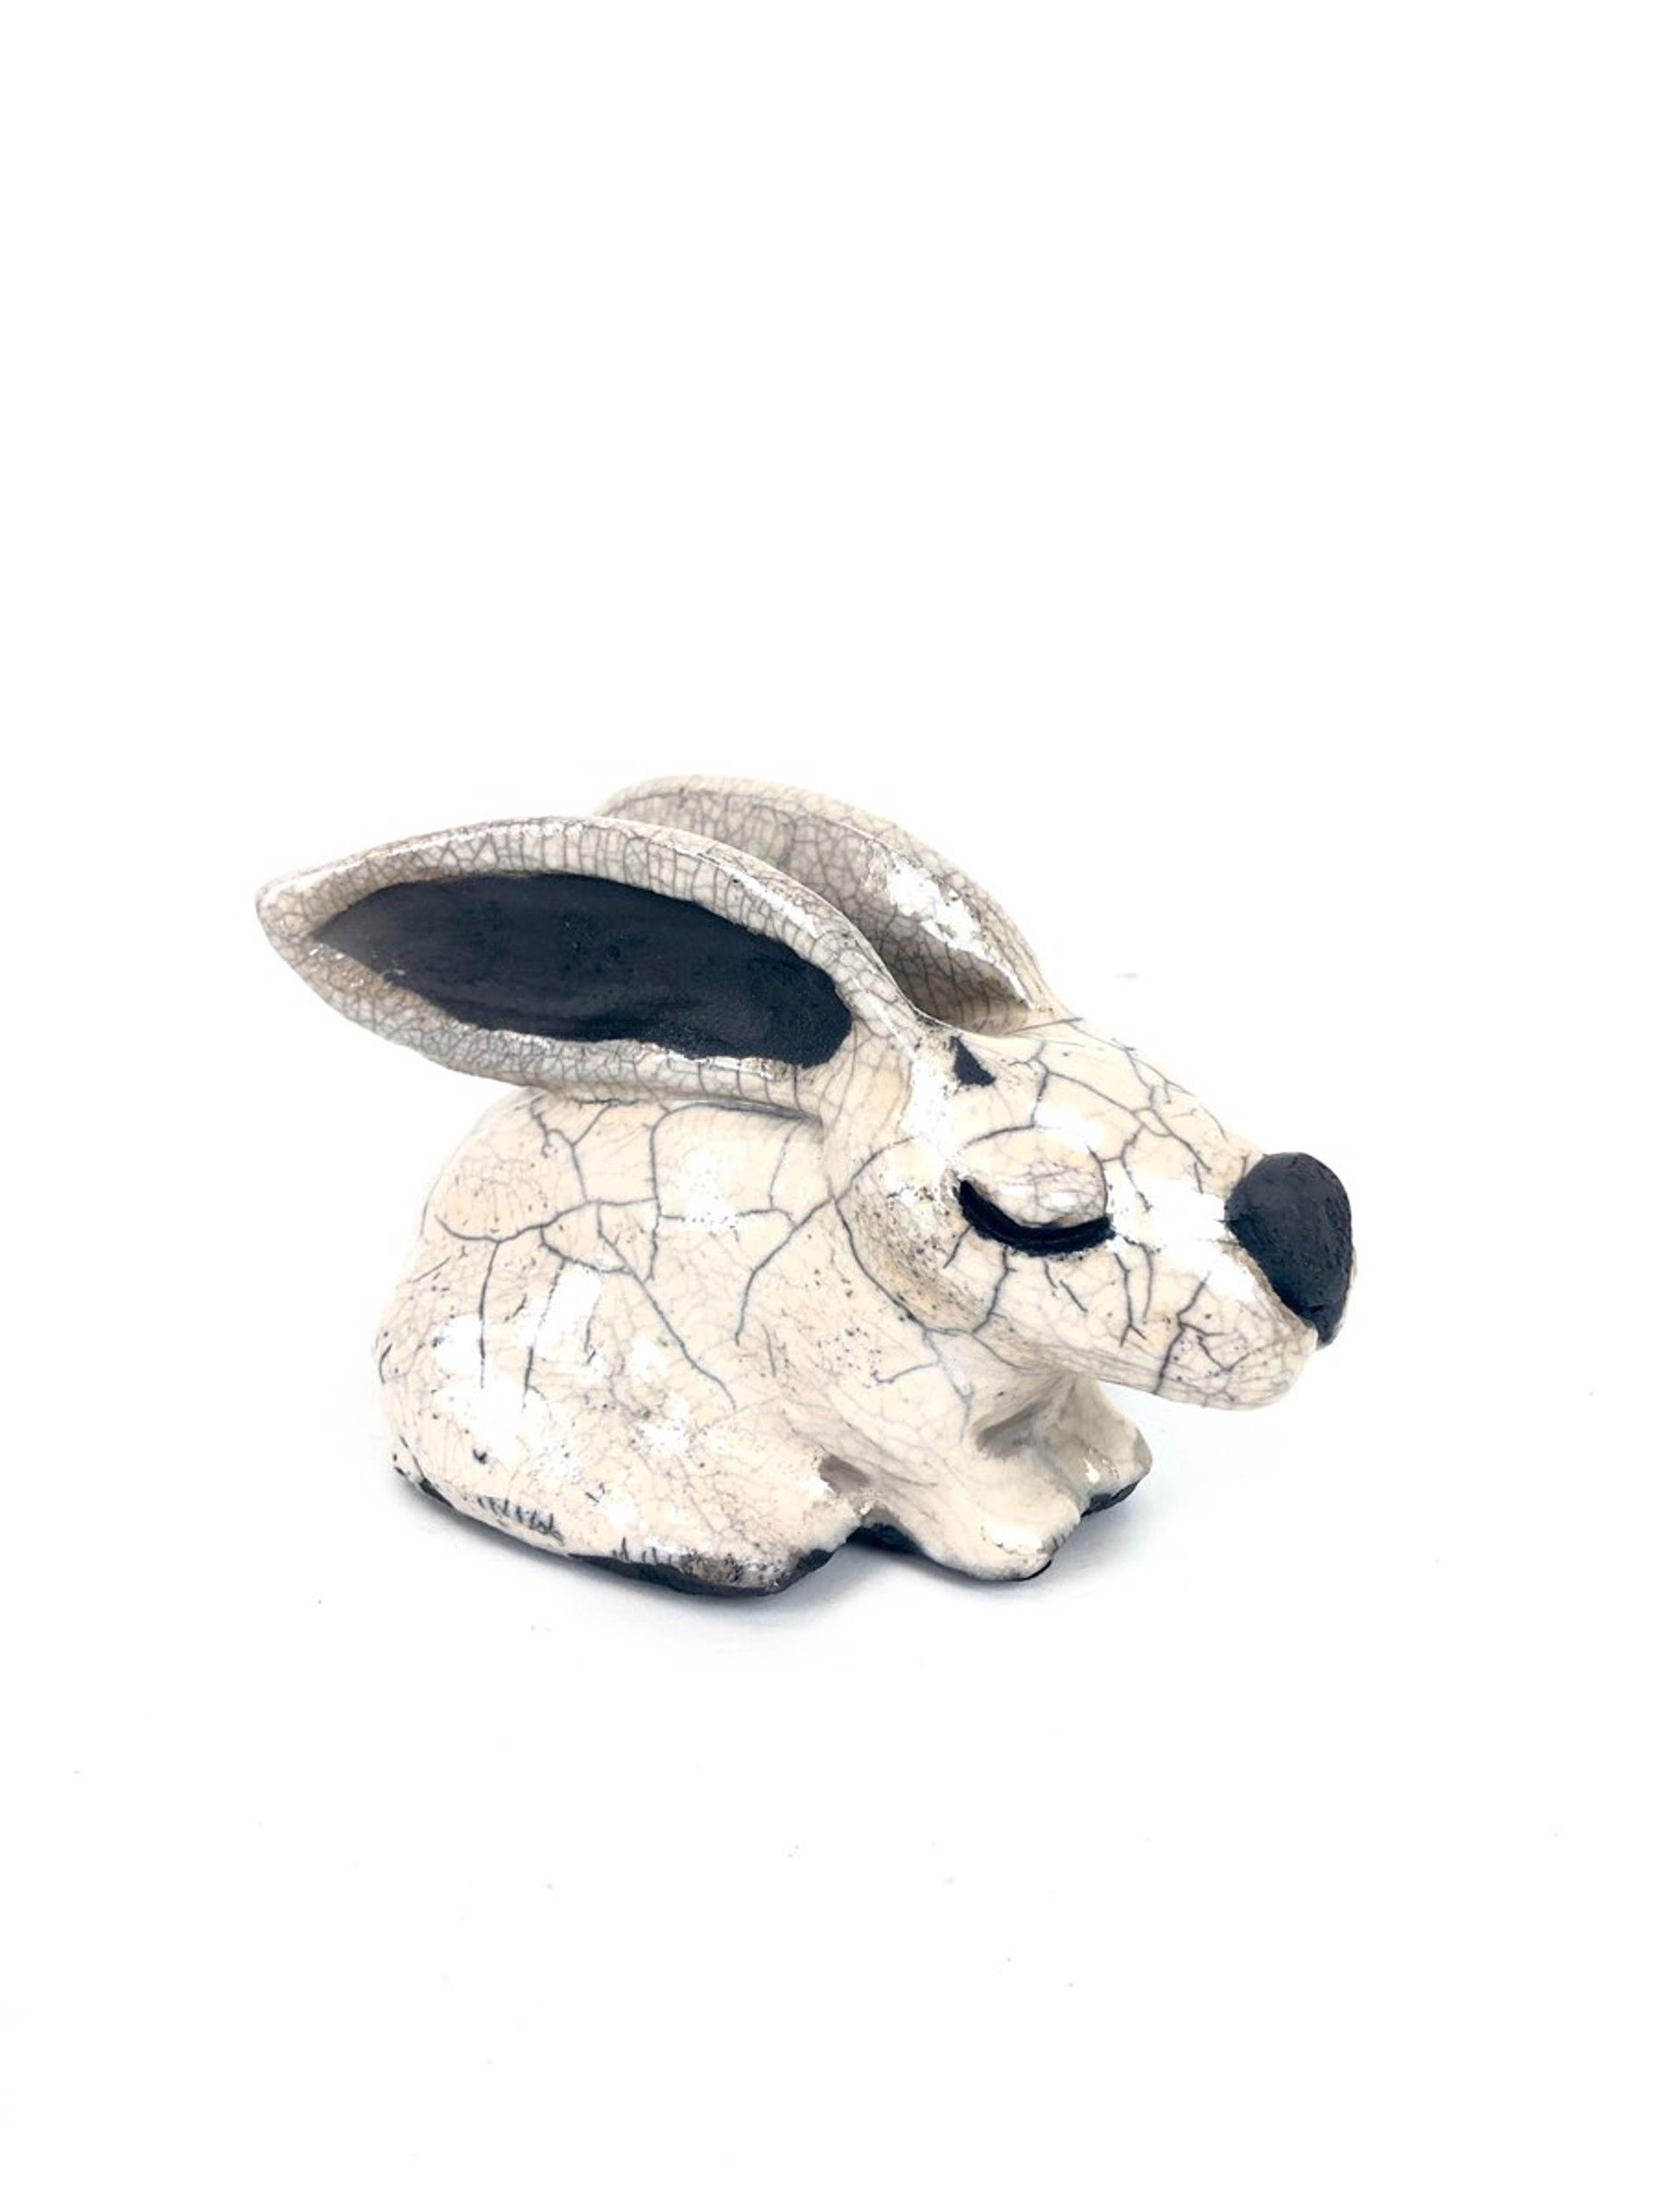 X-Small Crackle Bunny by Susan Lawless